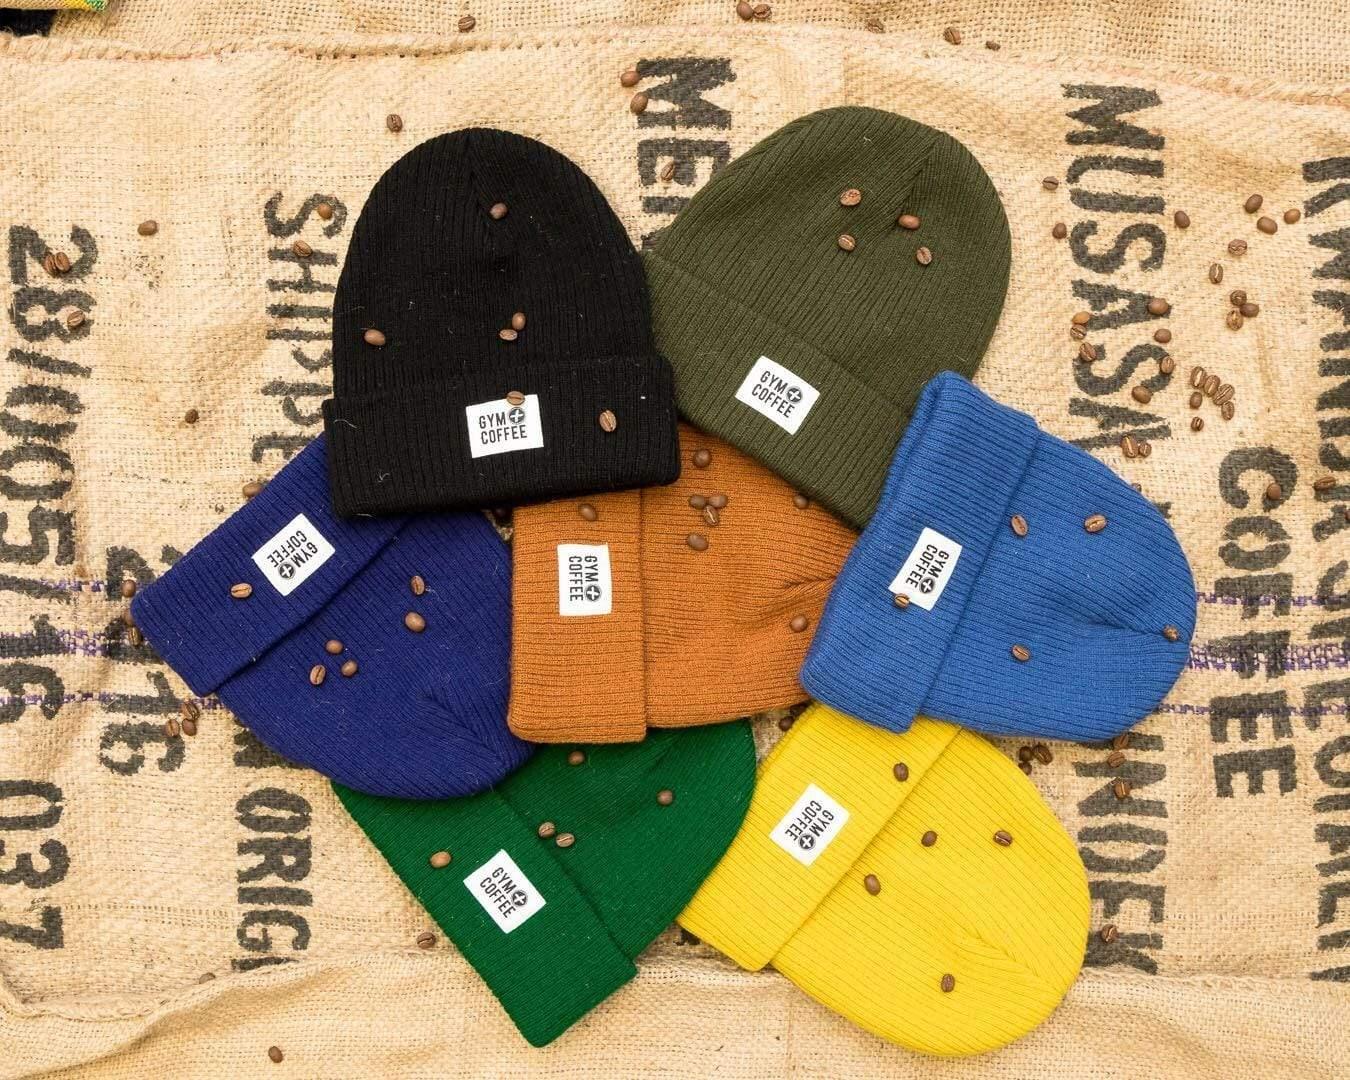 Help decide our new beanies! - Gym+Coffee